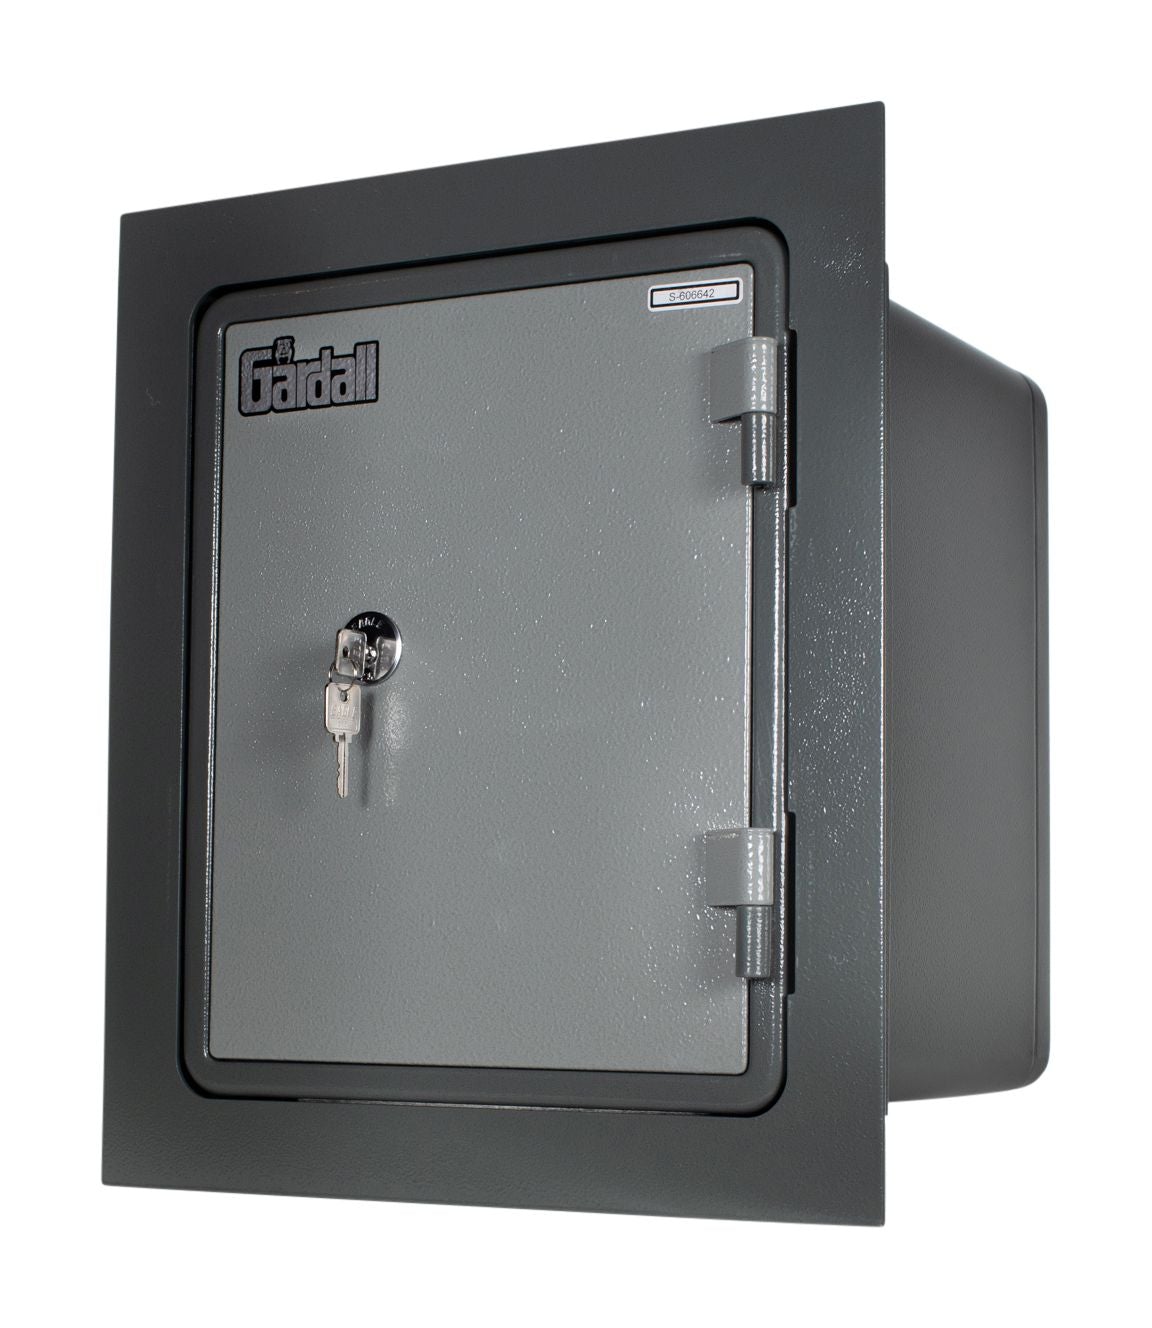 Gardall WMS129-G-K Fireproof Wall Safe (with flange) with Key Lock